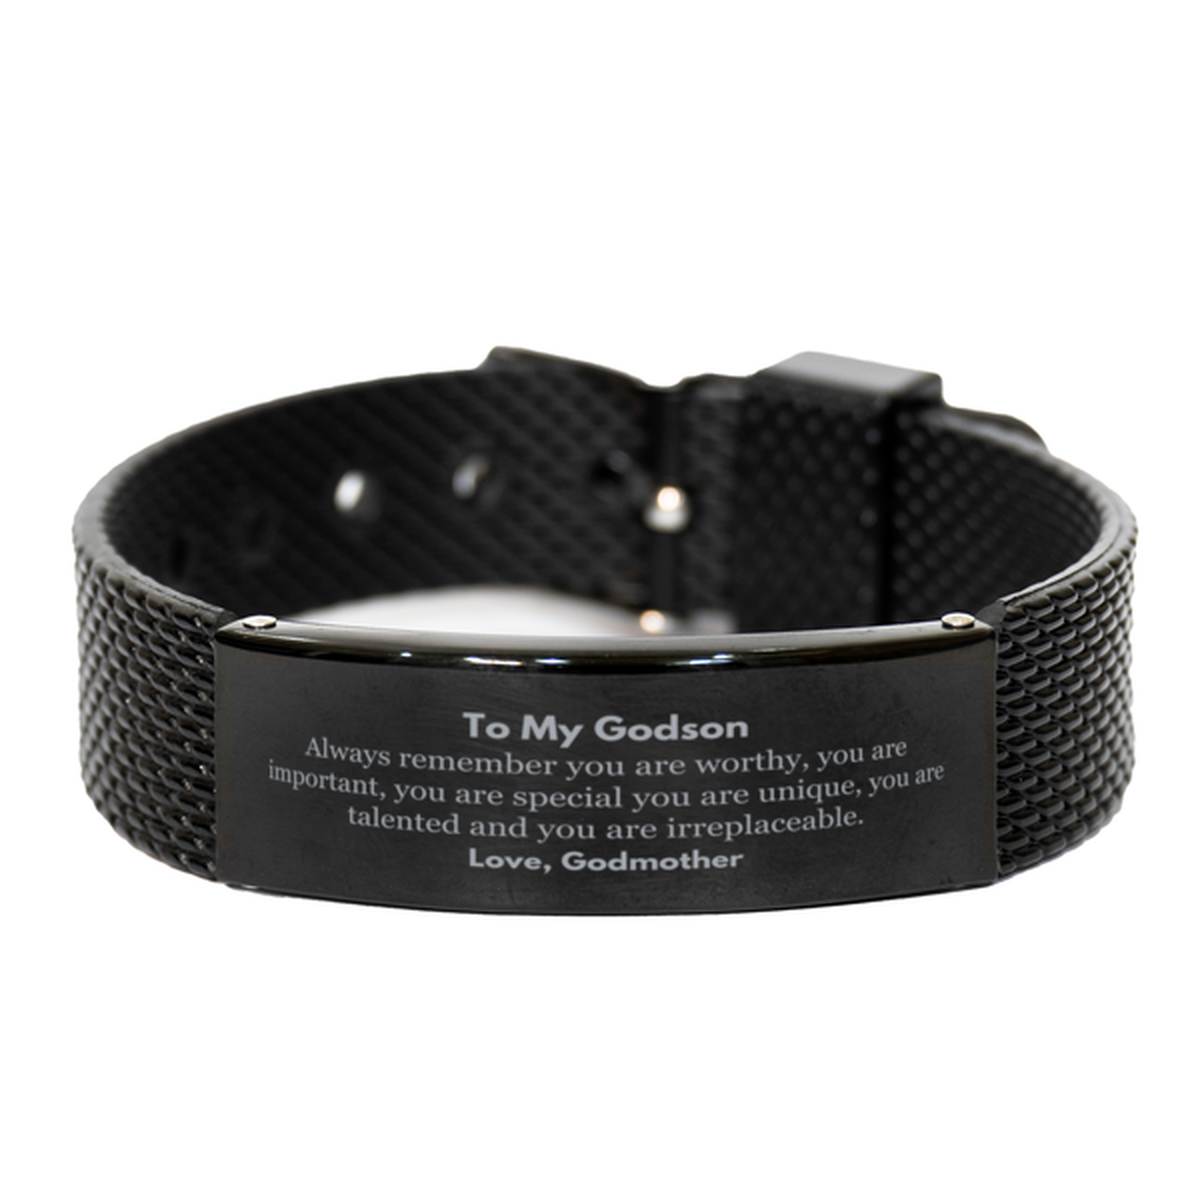 Godson Birthday Gifts from Godmother, Inspirational Black Shark Mesh Bracelet for Godson Christmas Graduation Gifts for Godson Always remember you are worthy, you are important. Love, Godmother